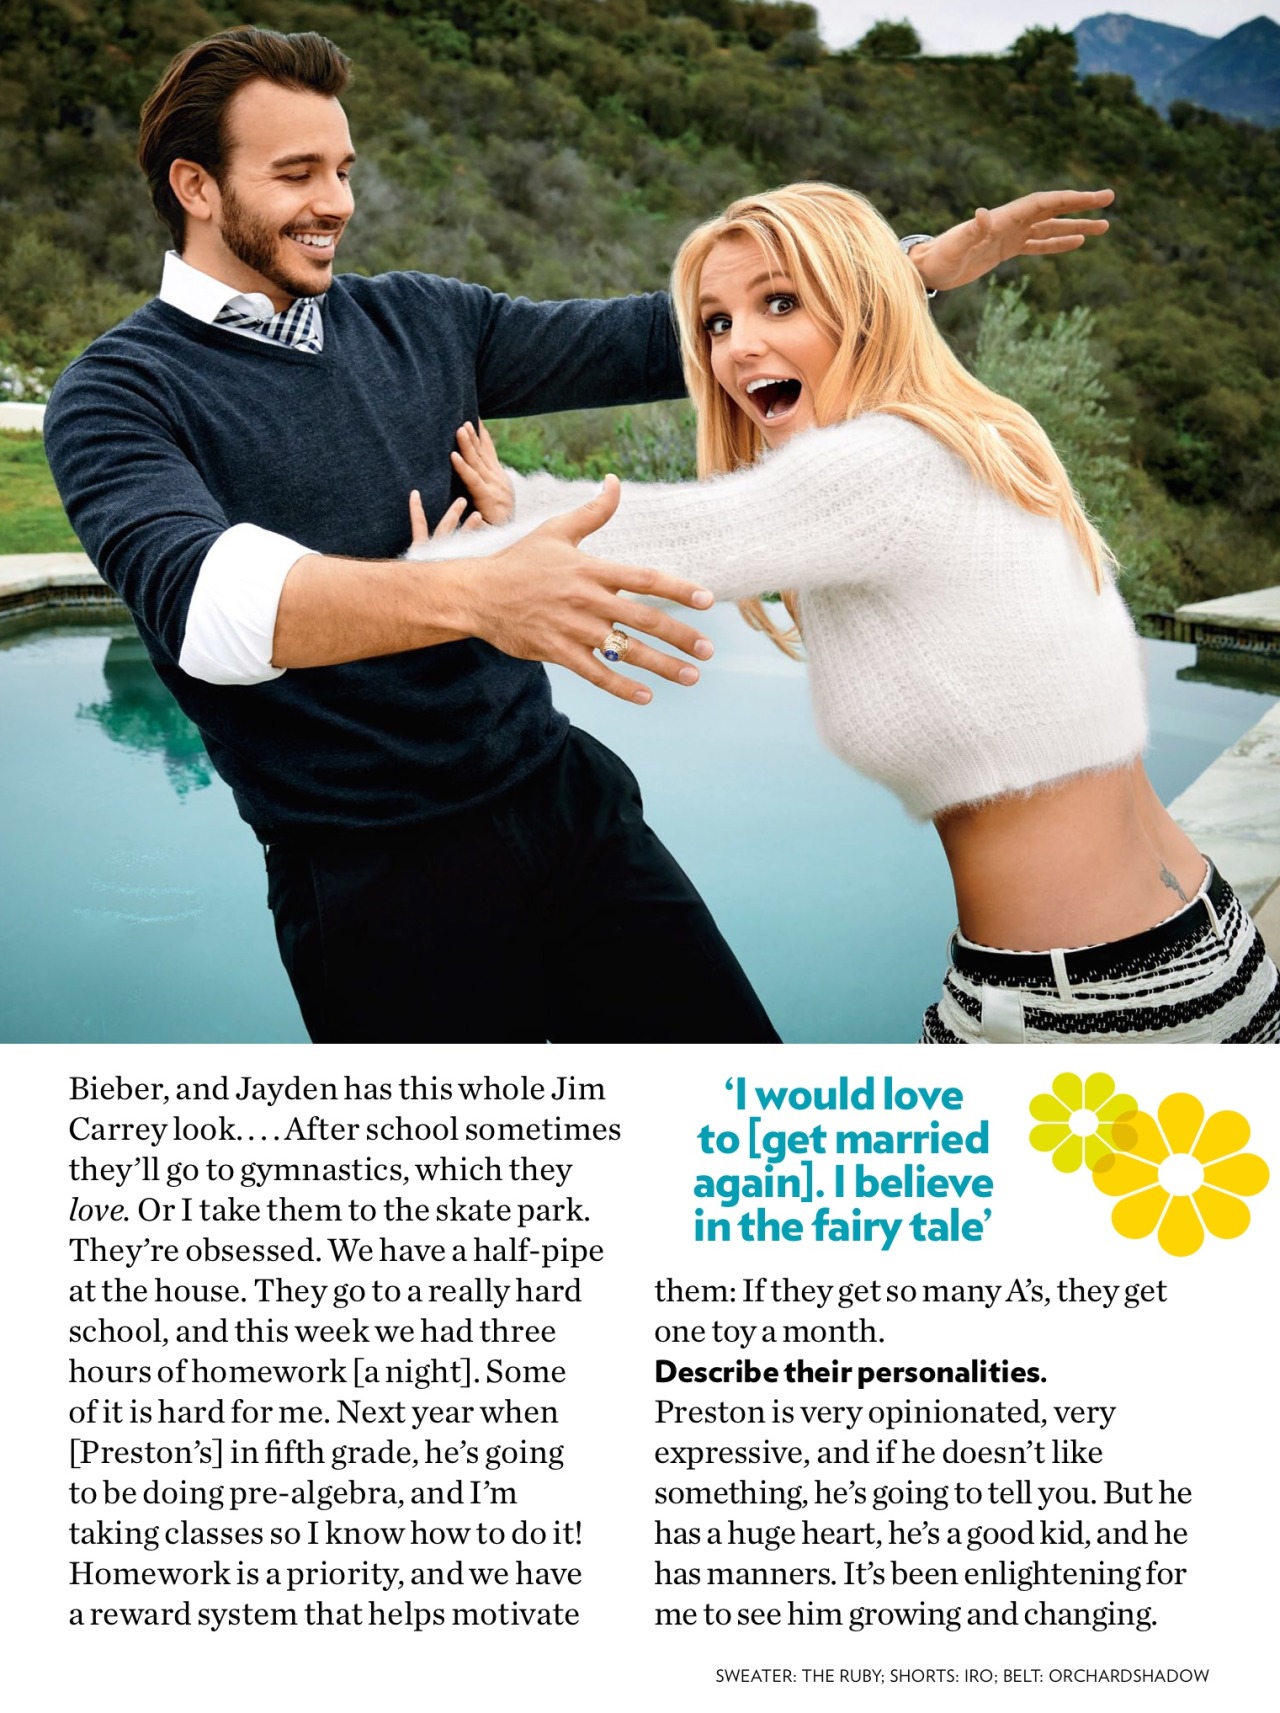 britney:“Did you ever think you’d be this happy? No, never. Not in my wildest